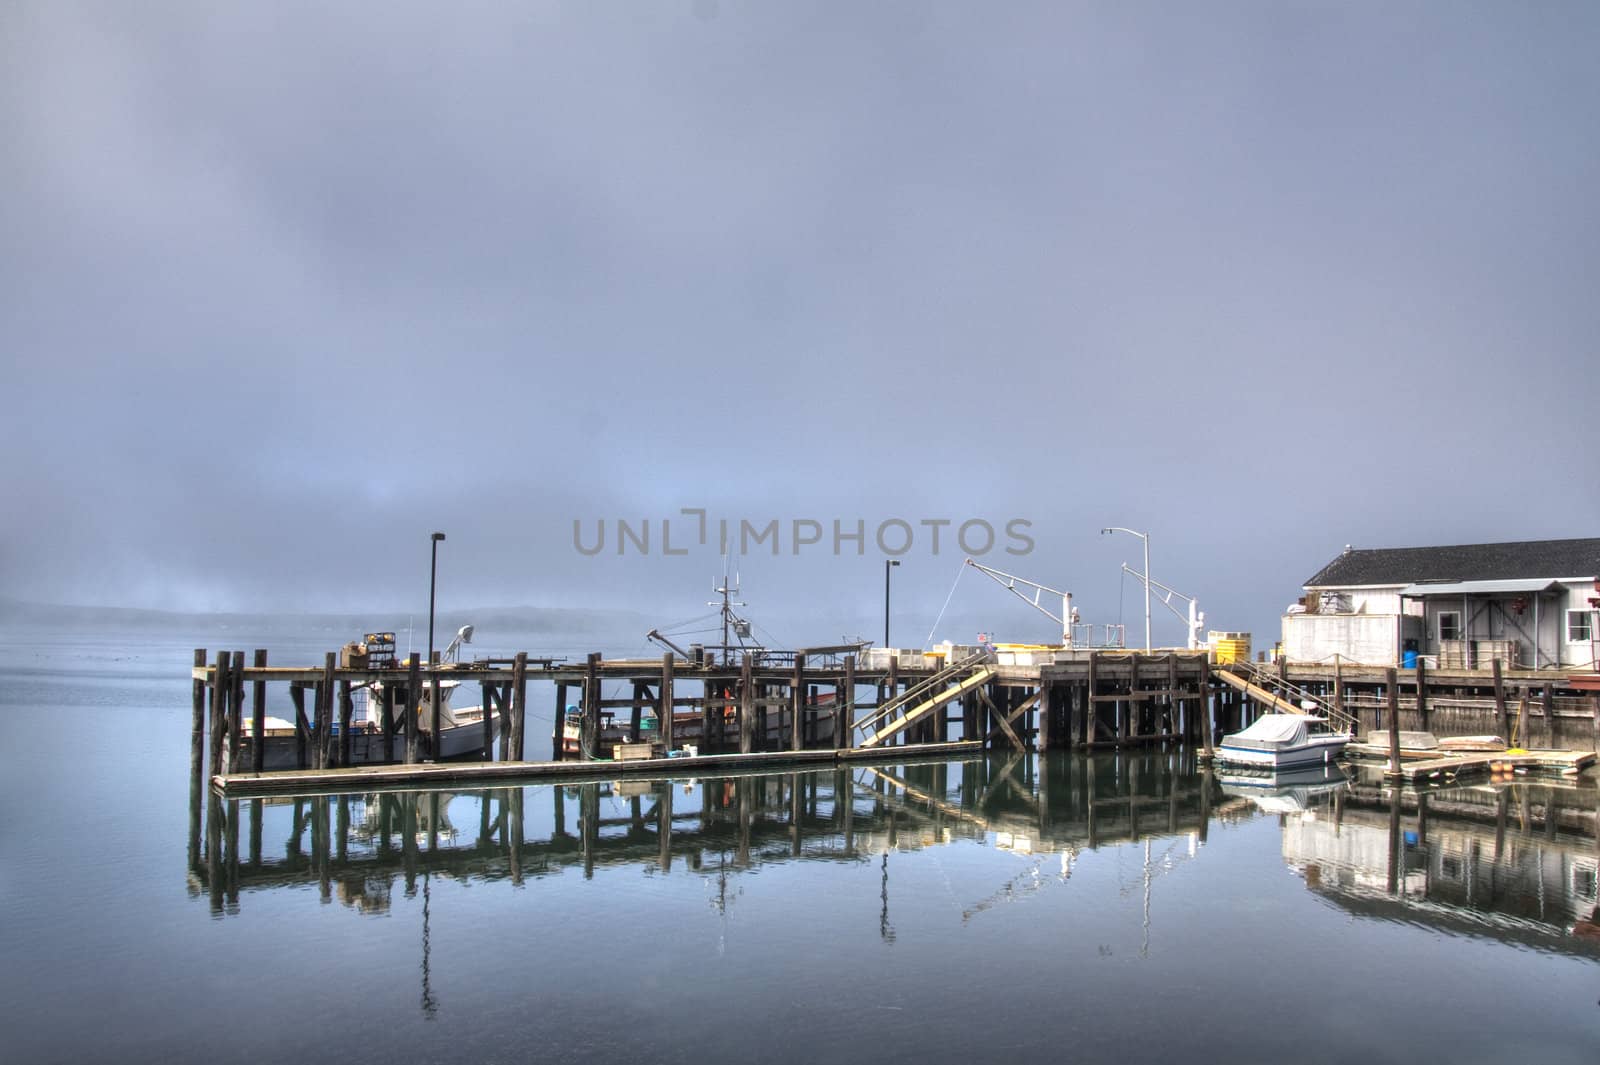 An early morning image of a wharf with frost